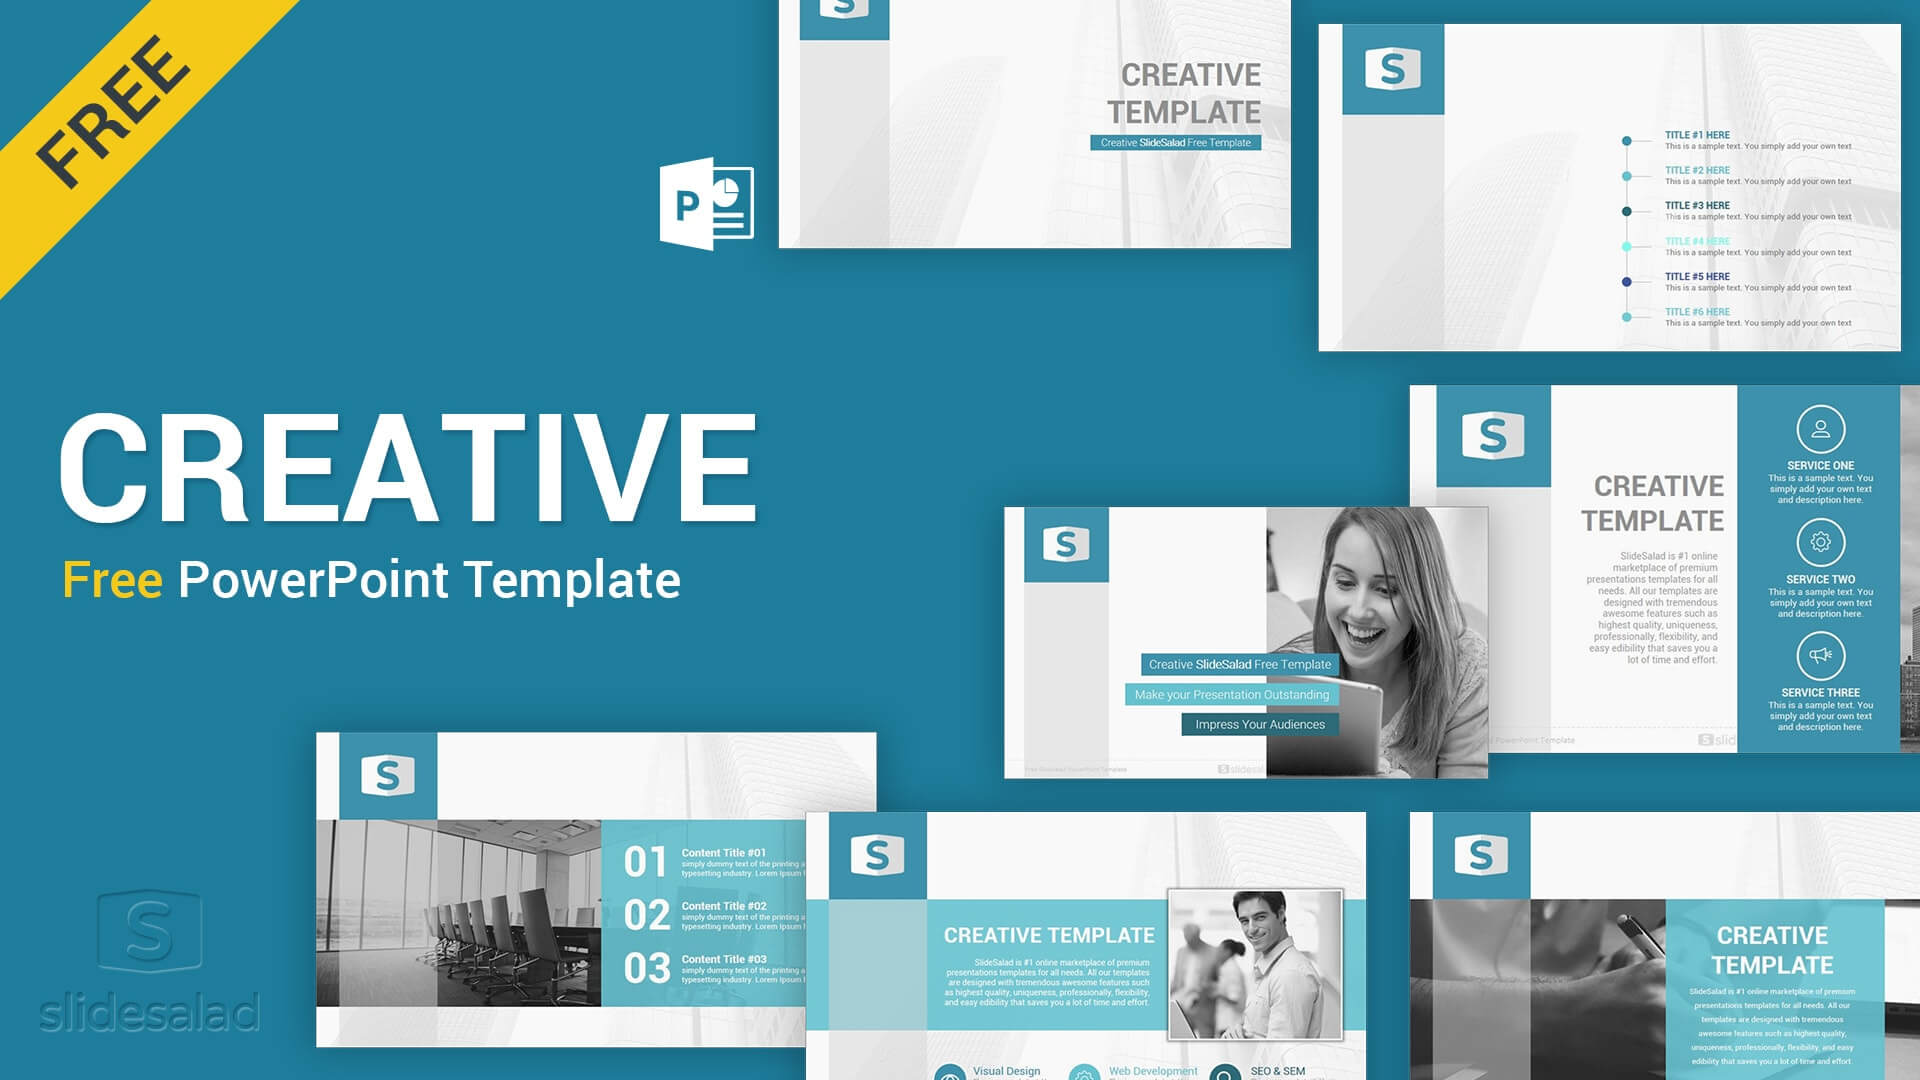 Creative Free Download Powerpoint Template – Slidesalad Intended For Powerpoint Sample Templates Free Download